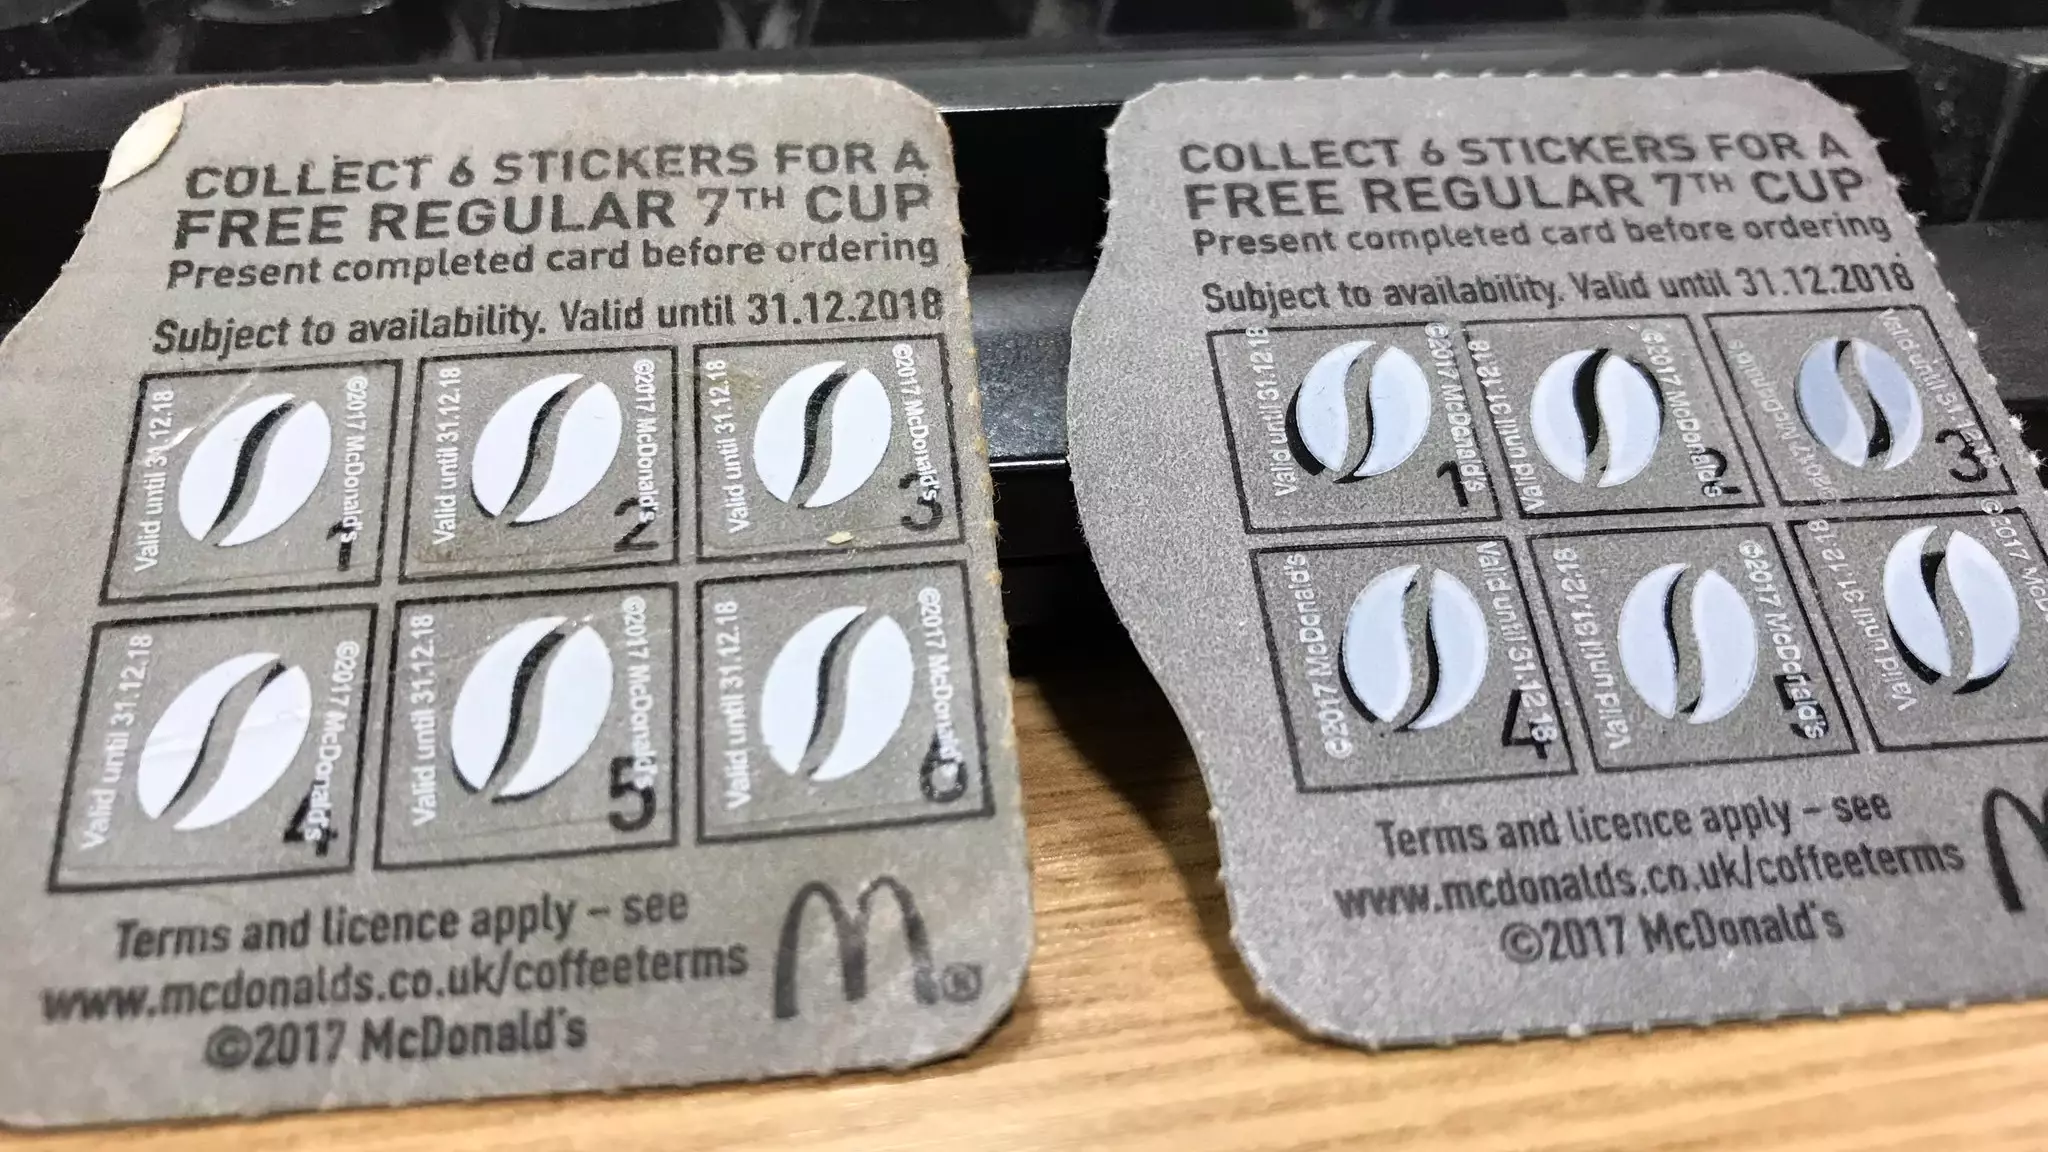 Police Arrest Man Found With Sheets Of Fake McDonald's Coffee Stickers